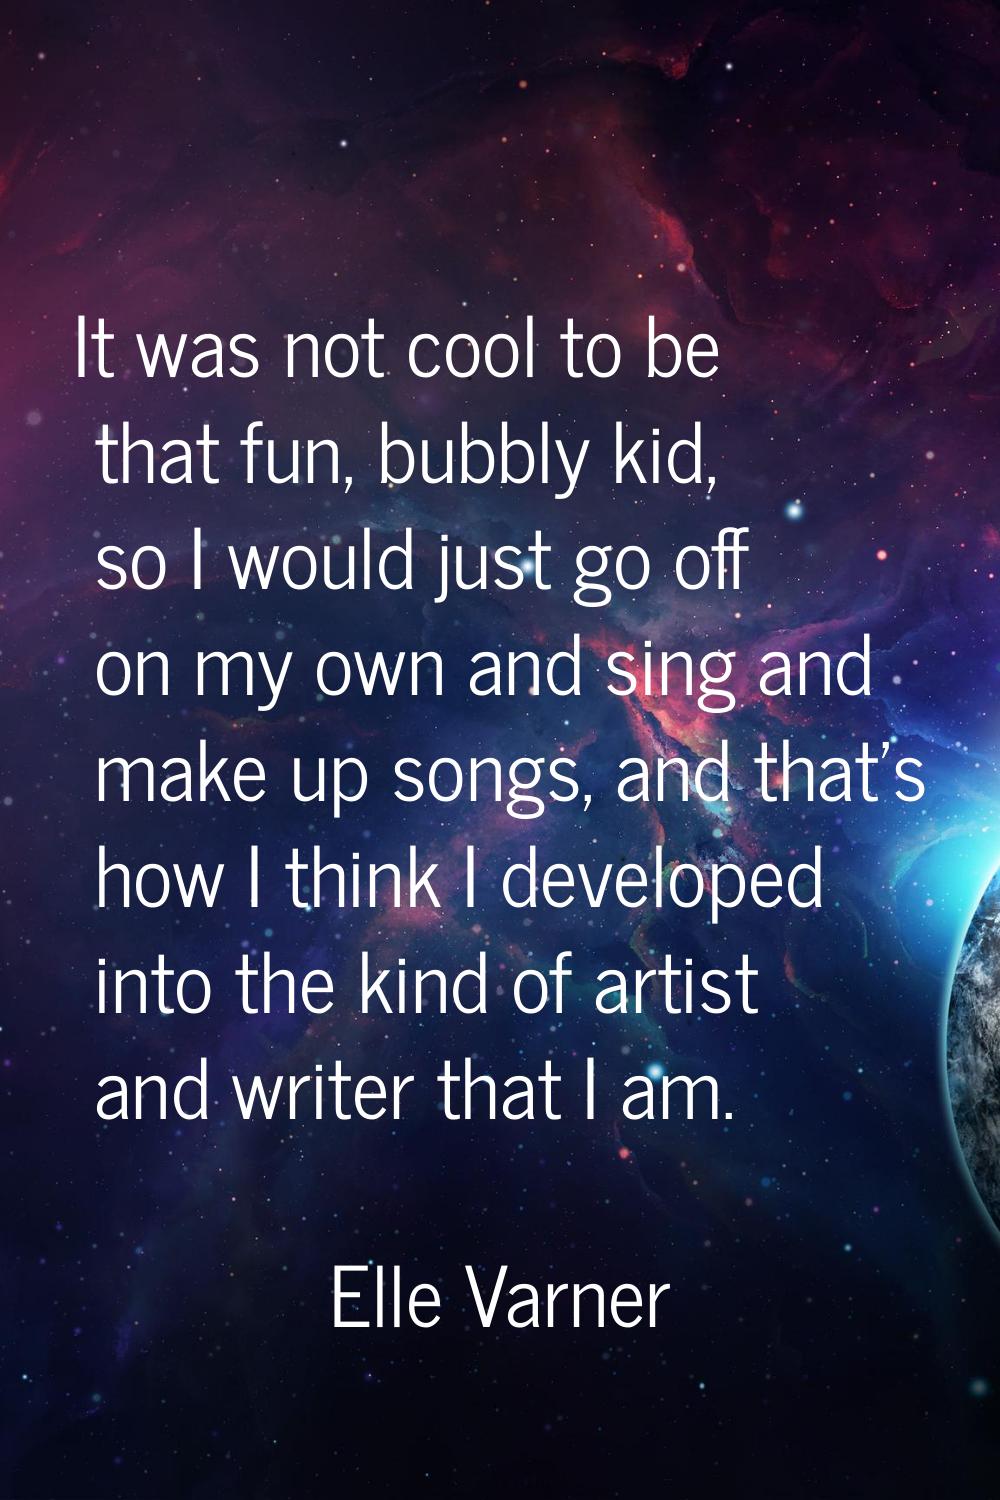 It was not cool to be that fun, bubbly kid, so I would just go off on my own and sing and make up s